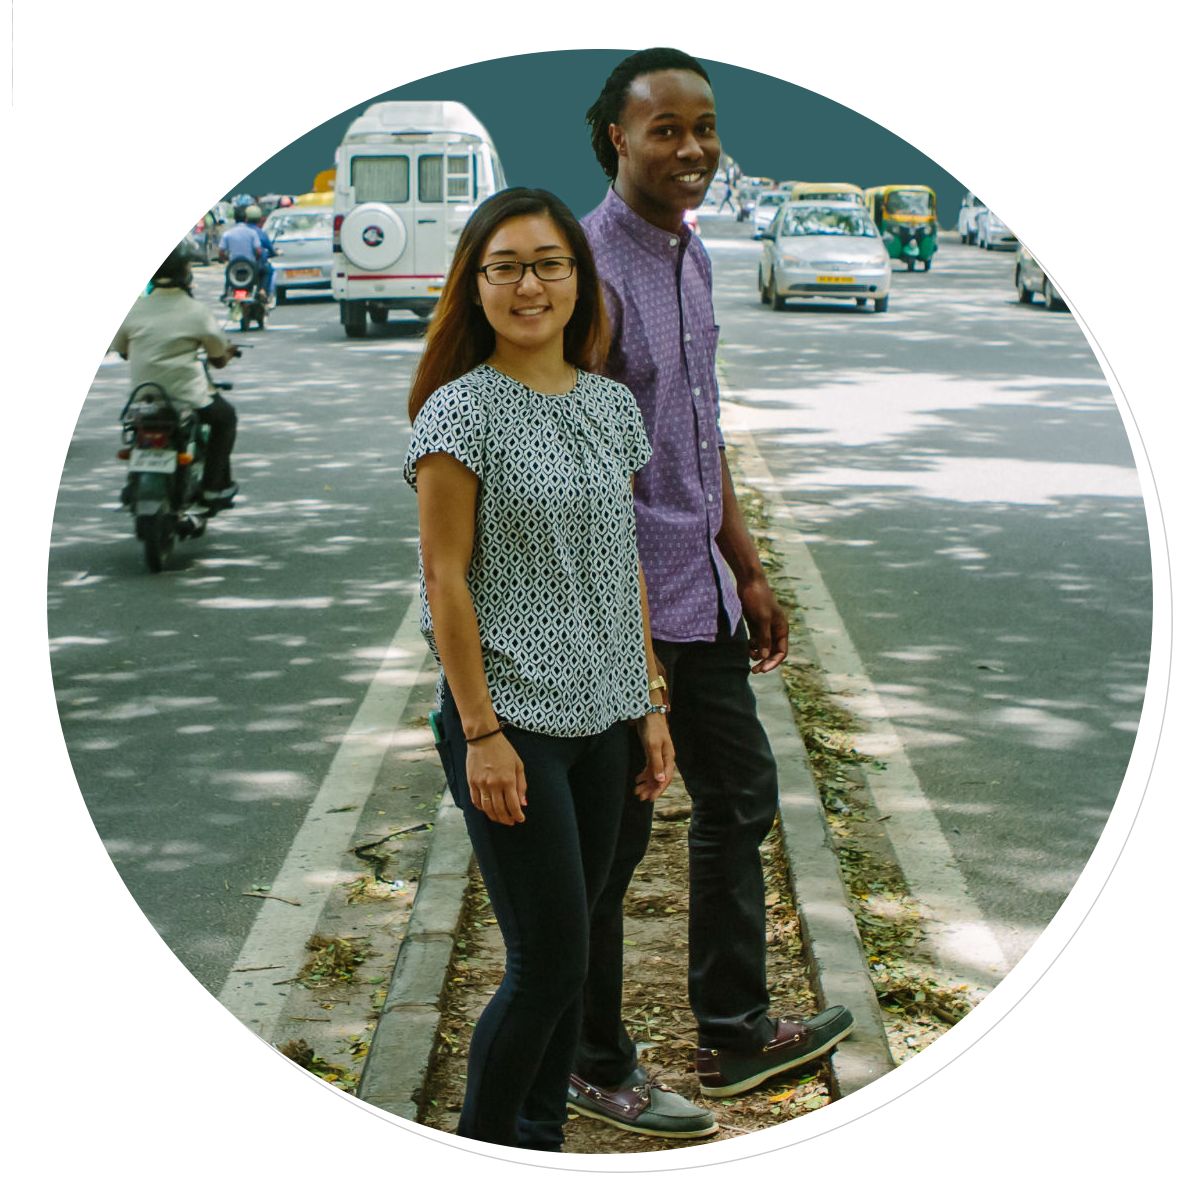 Two people stand in the median of a road